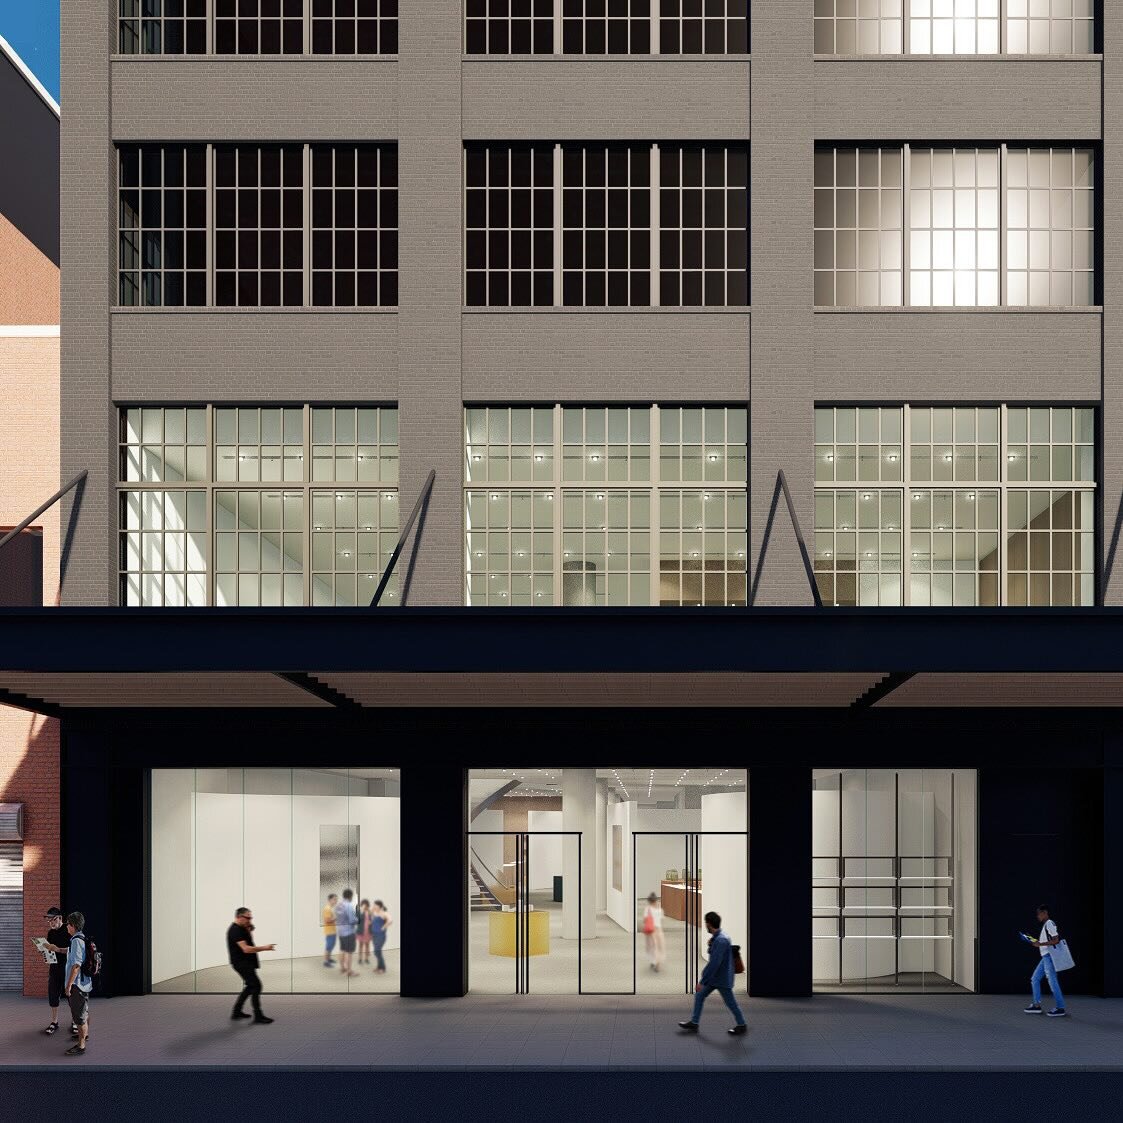 #tbt #retailprojectlimbo #meatpackingdistrict #nycflagshipstore #reidarchitecture